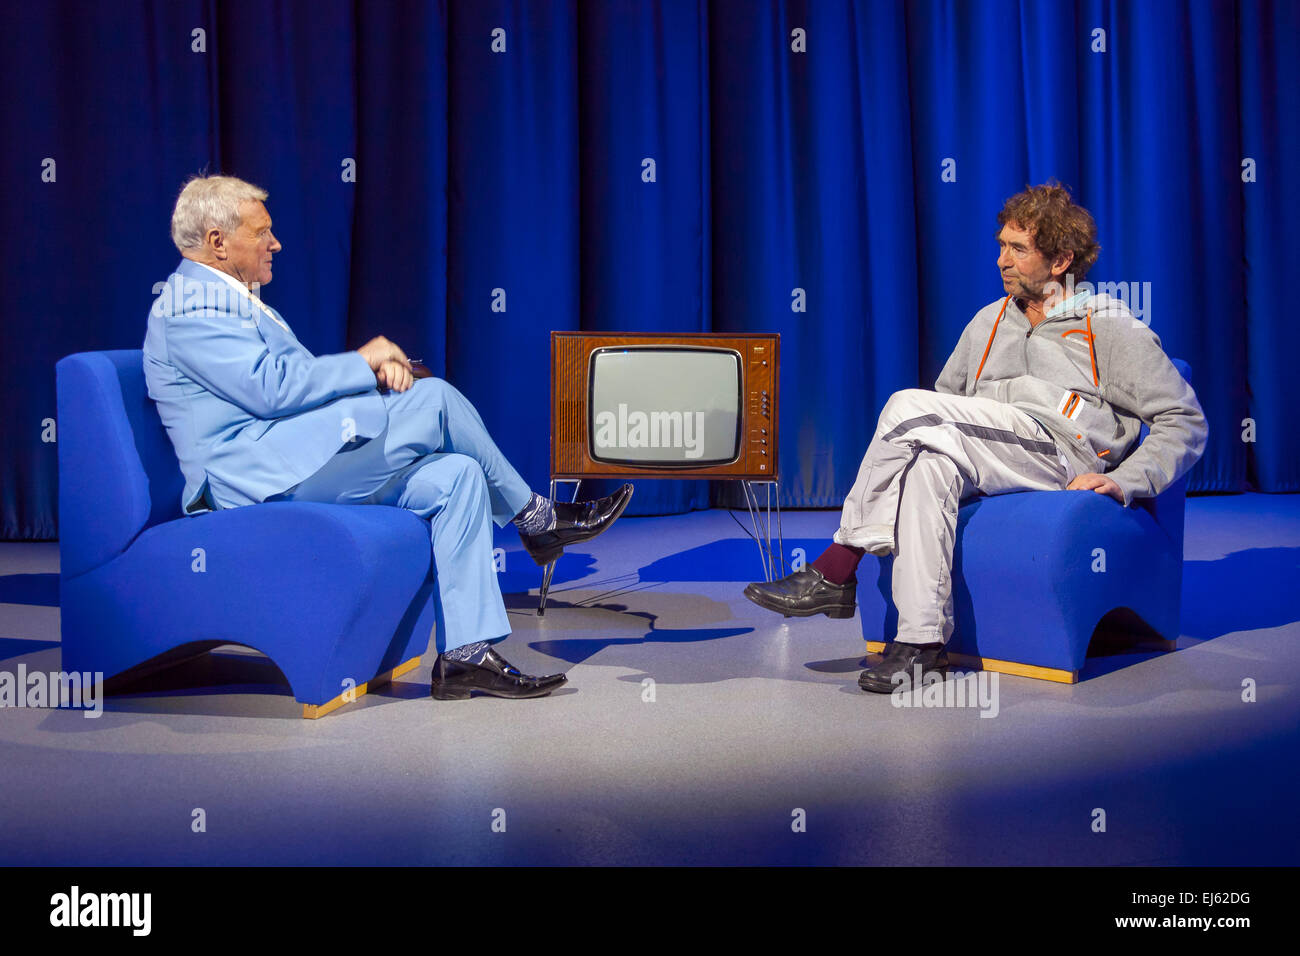 Walsall, West Midlands, UK. 22 March 2015. David Hamilton (L) with English singer songwriter Jona Lewie at a recording of ‘The David Hamilton Show’ for Big Centre TV. Hosted by presenter and broadcaster ‘Diddy’ David Hamilton the show features famous personalities from across the music and television spectrum. Credit:  John Henshall / Alamy Live News PER0528 Stock Photo